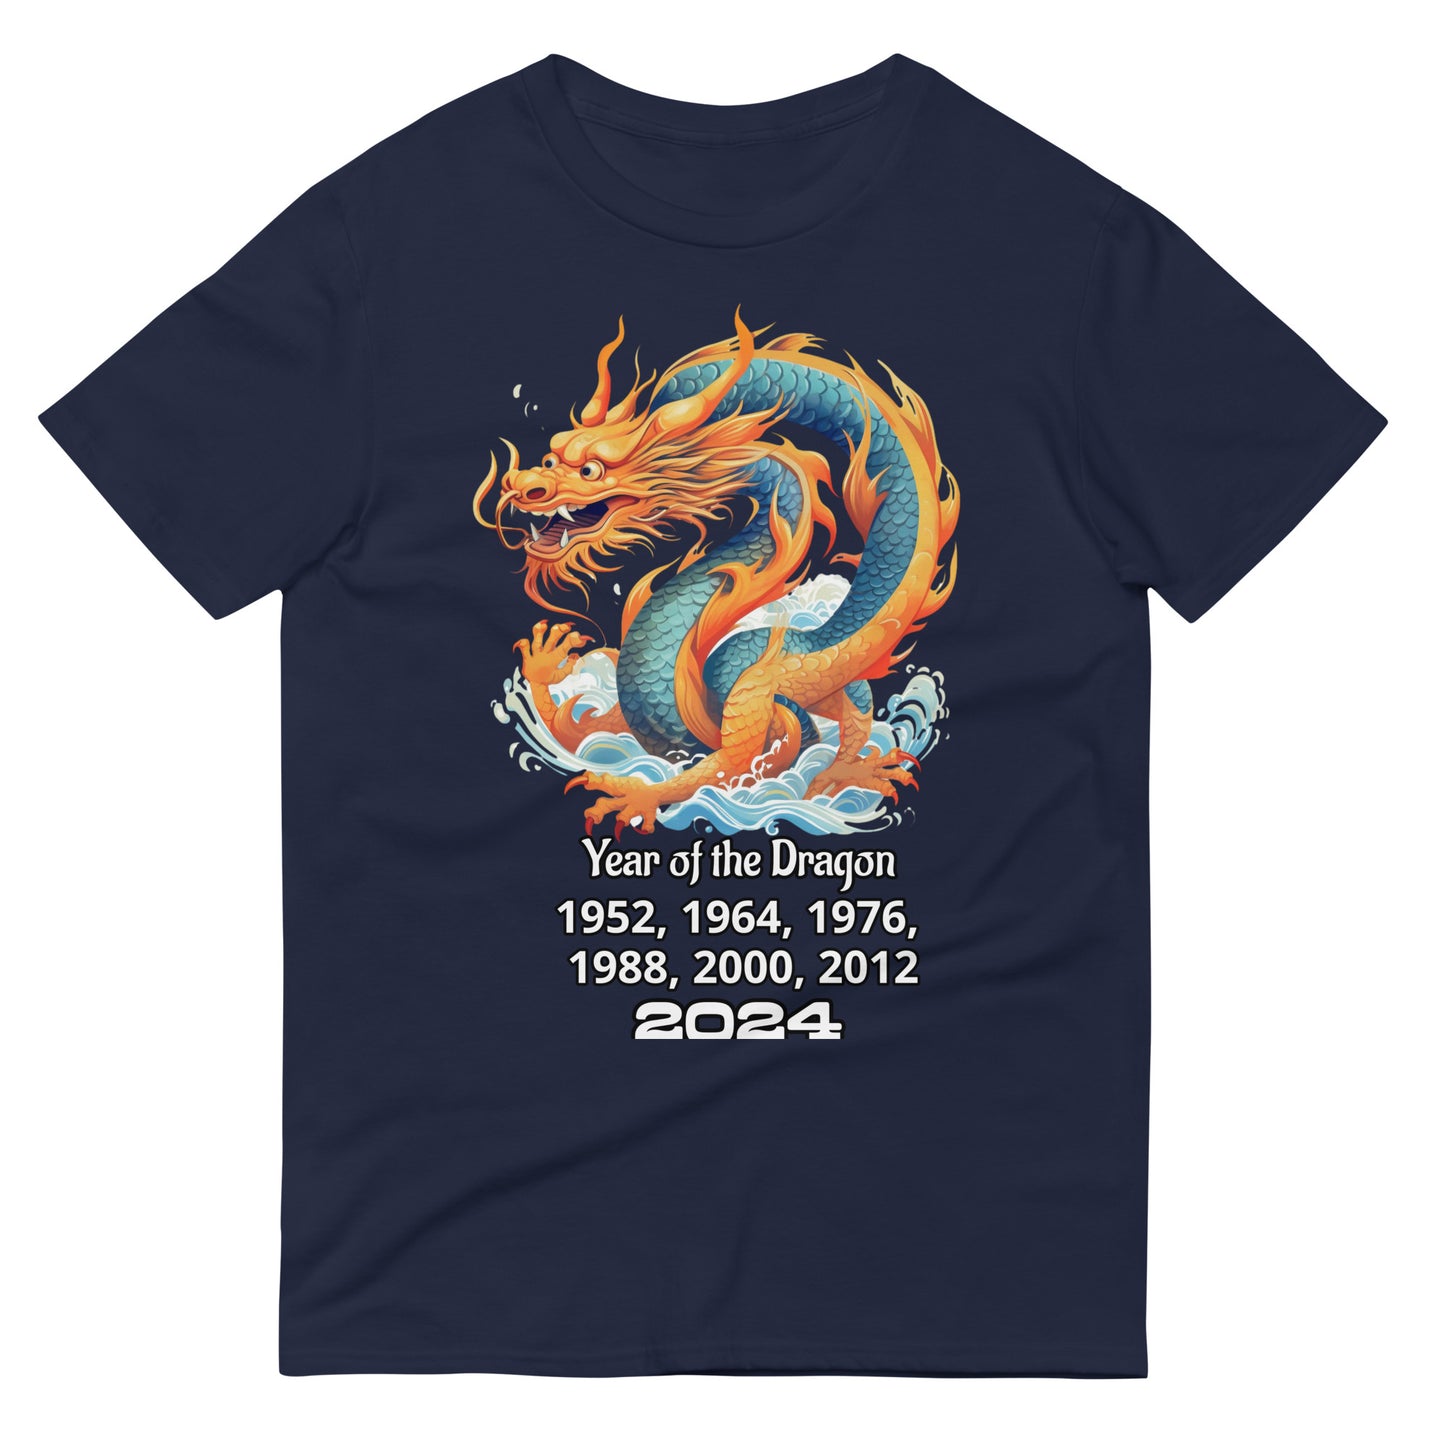 Year of the Dragon Short-Sleeve T-Shirt